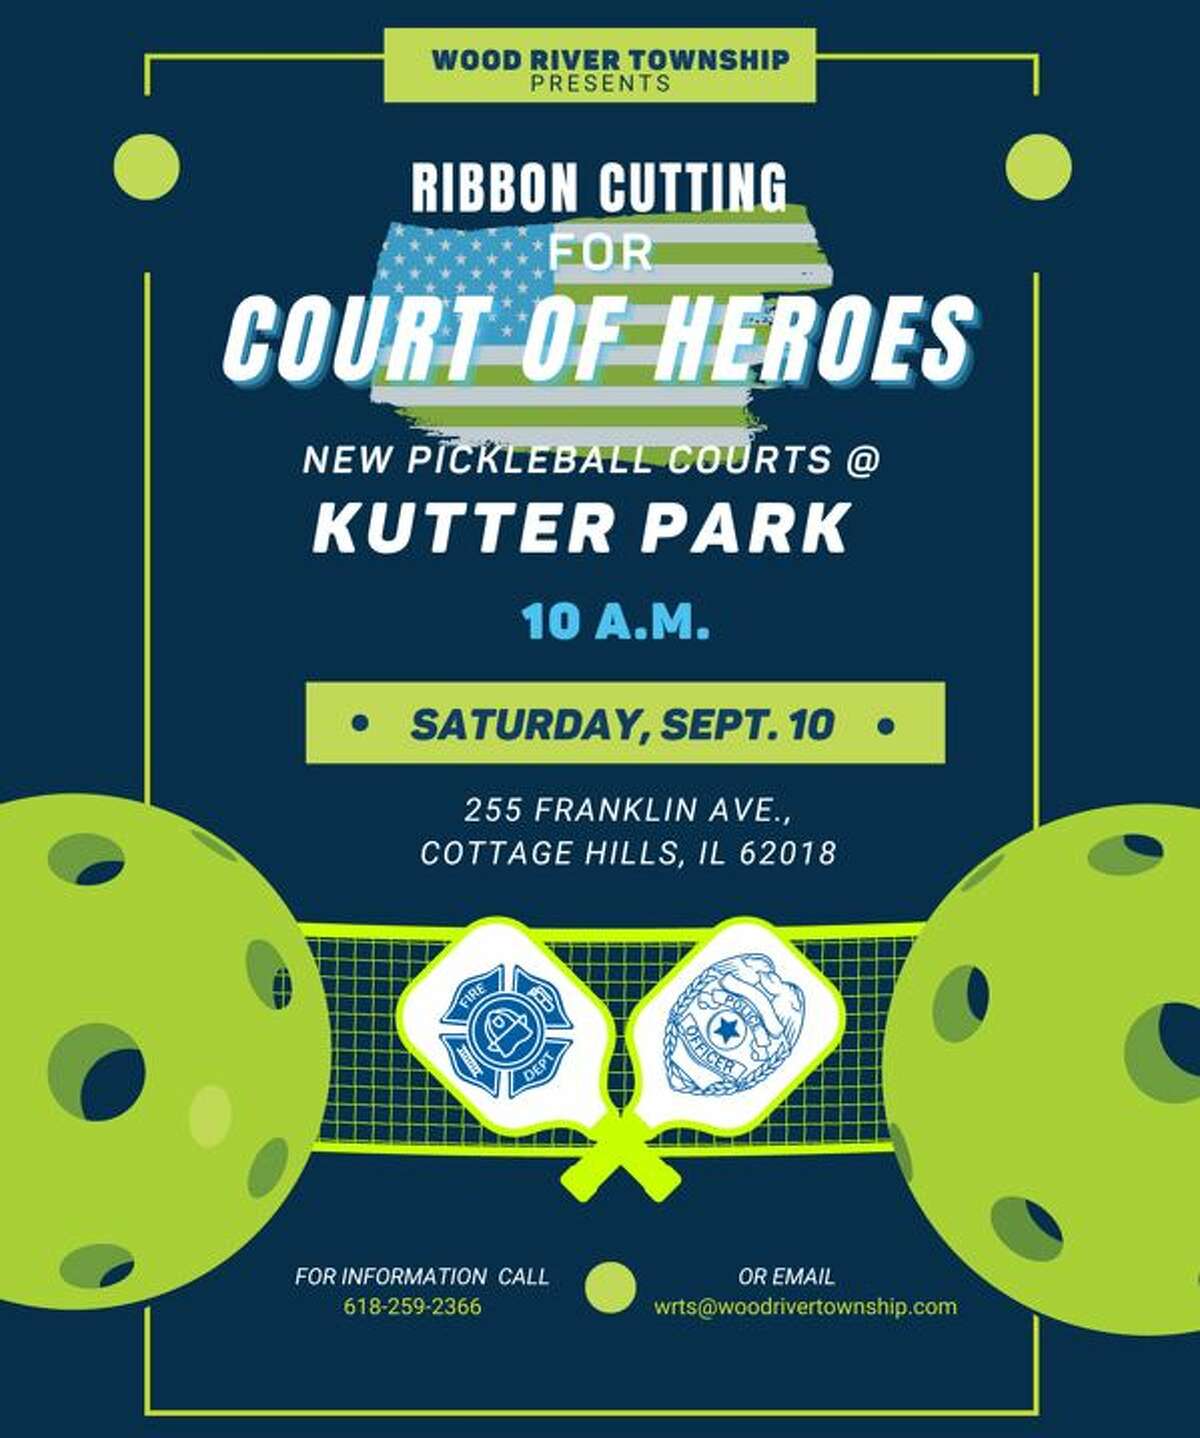 A ribbon cutting is set for the new pickleball courts in Cottage Hills at 10 a.m. Saturday.